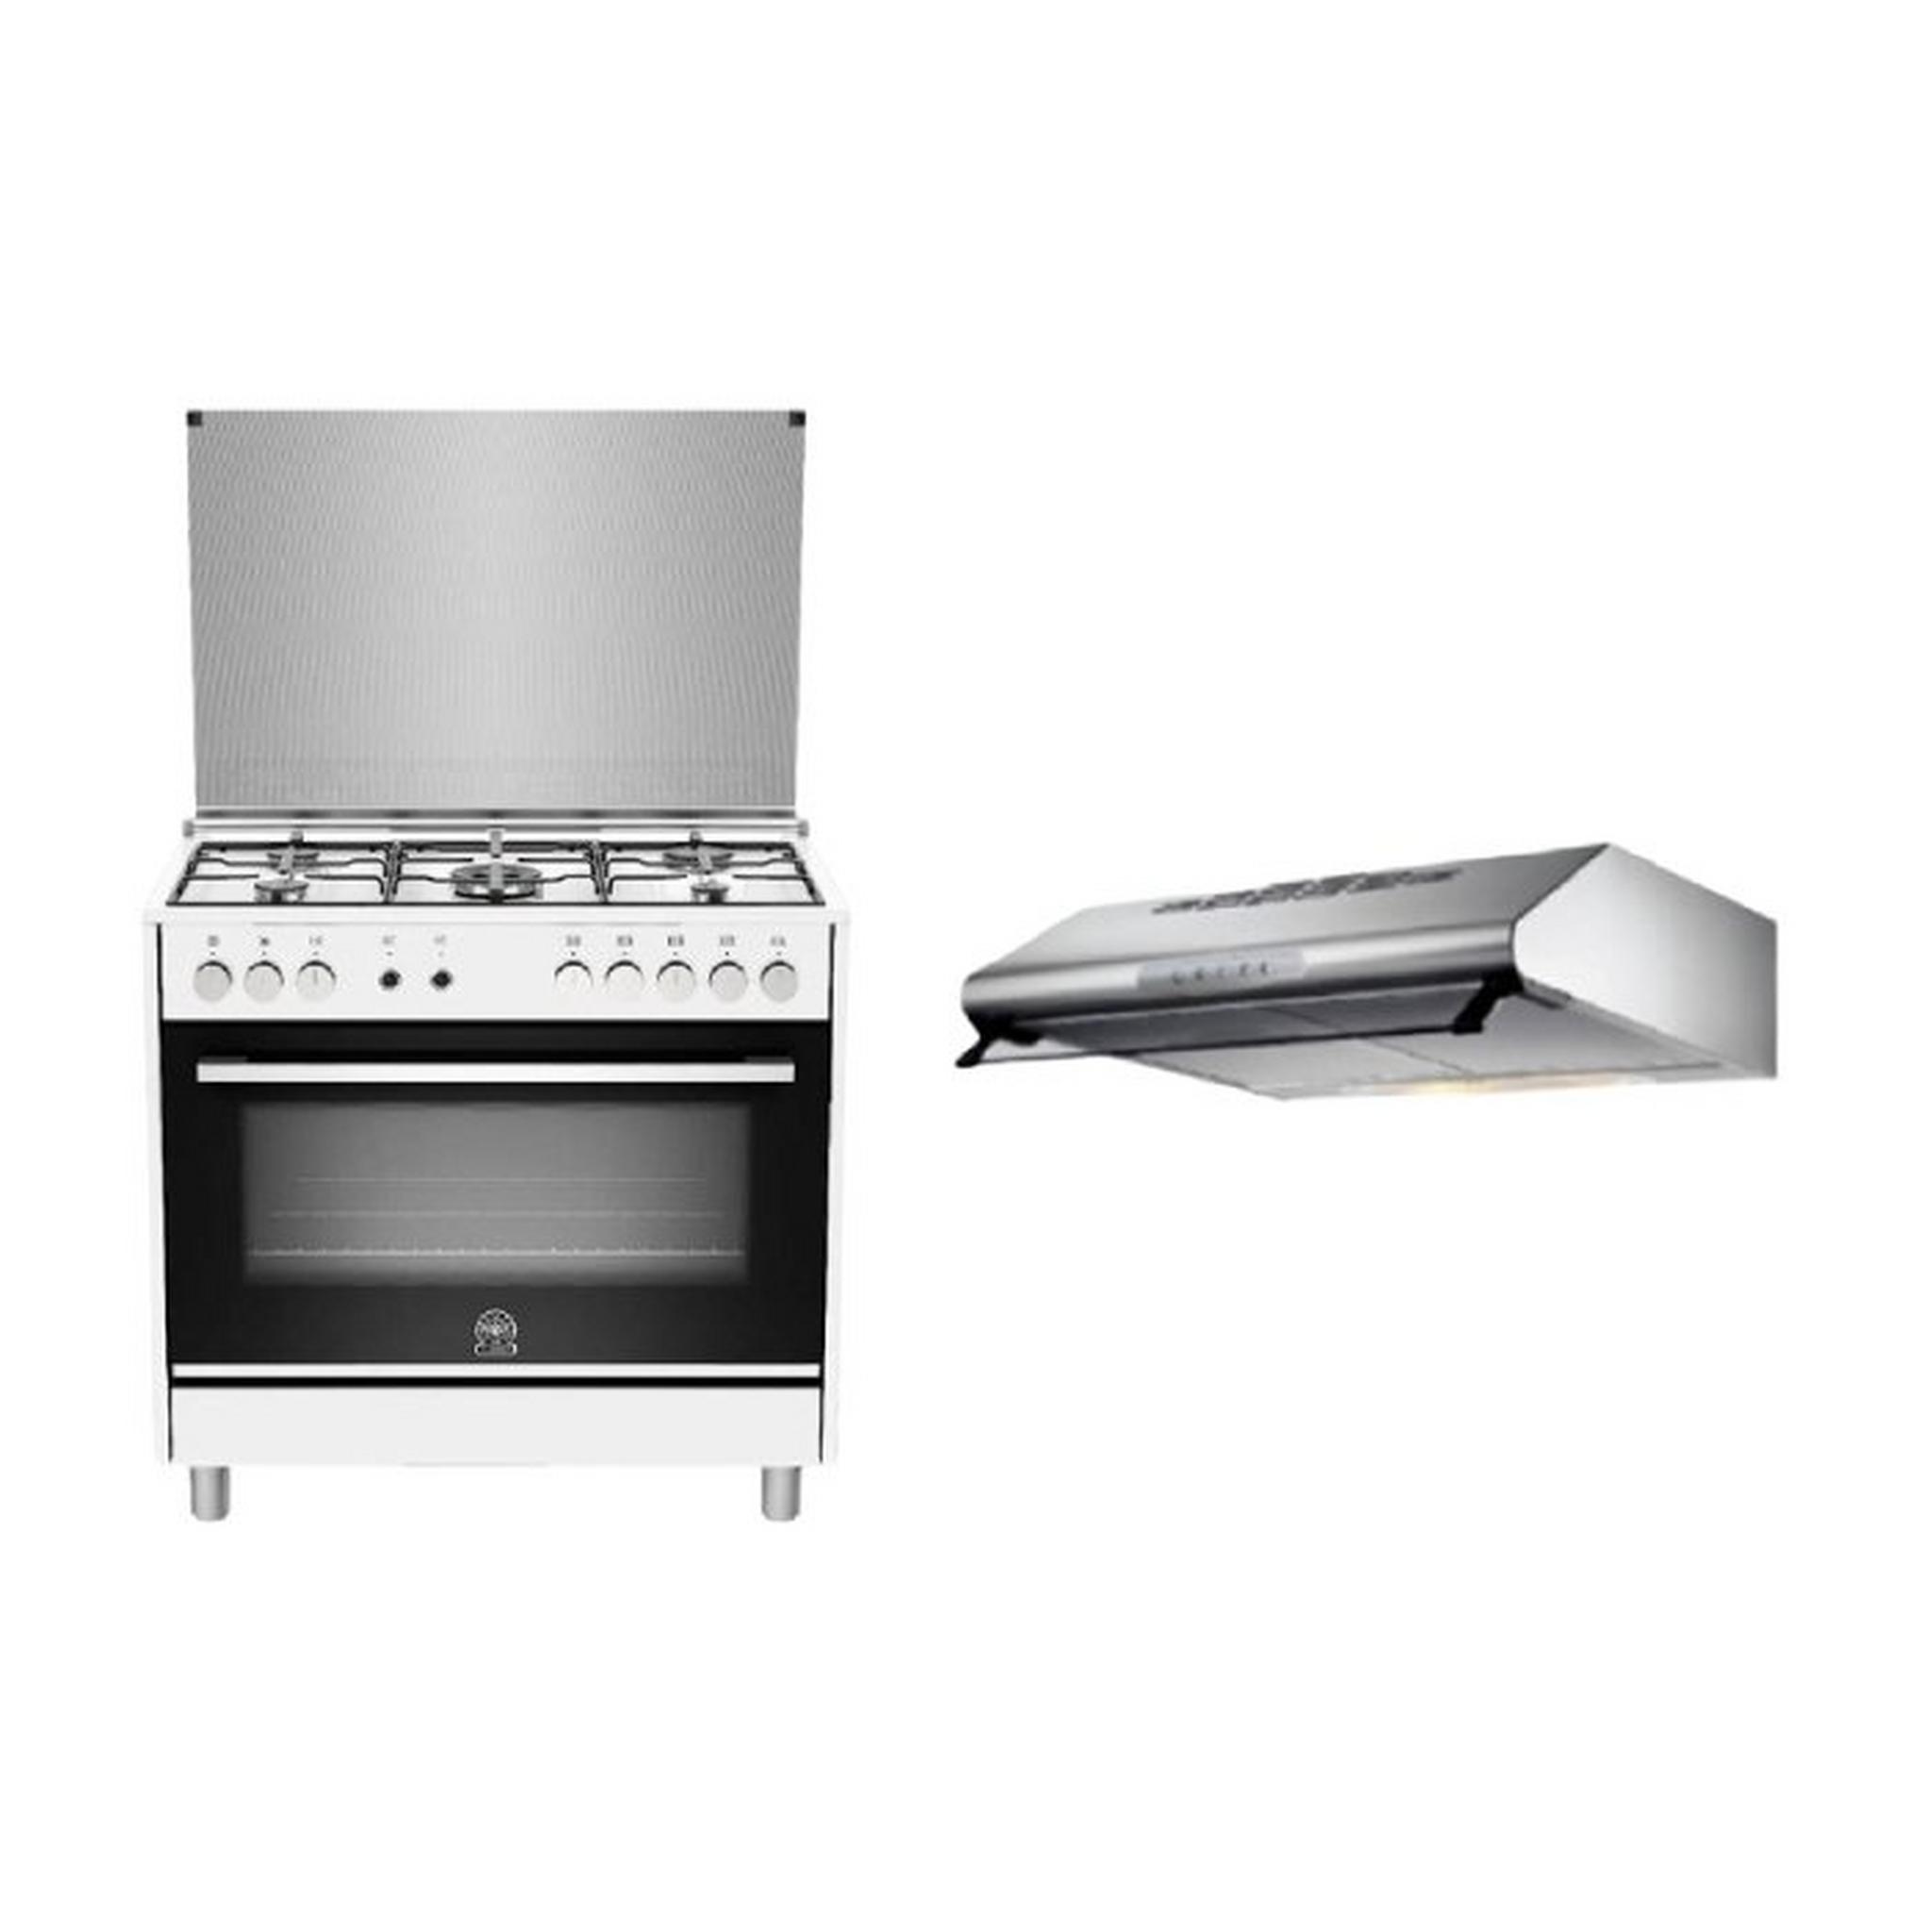 Lagermania 90x60CM 5 Burners Gas Cooker With Oven (TUS95C31DW) + Lagermania 90cm Under-Cabinet Cooker Hood